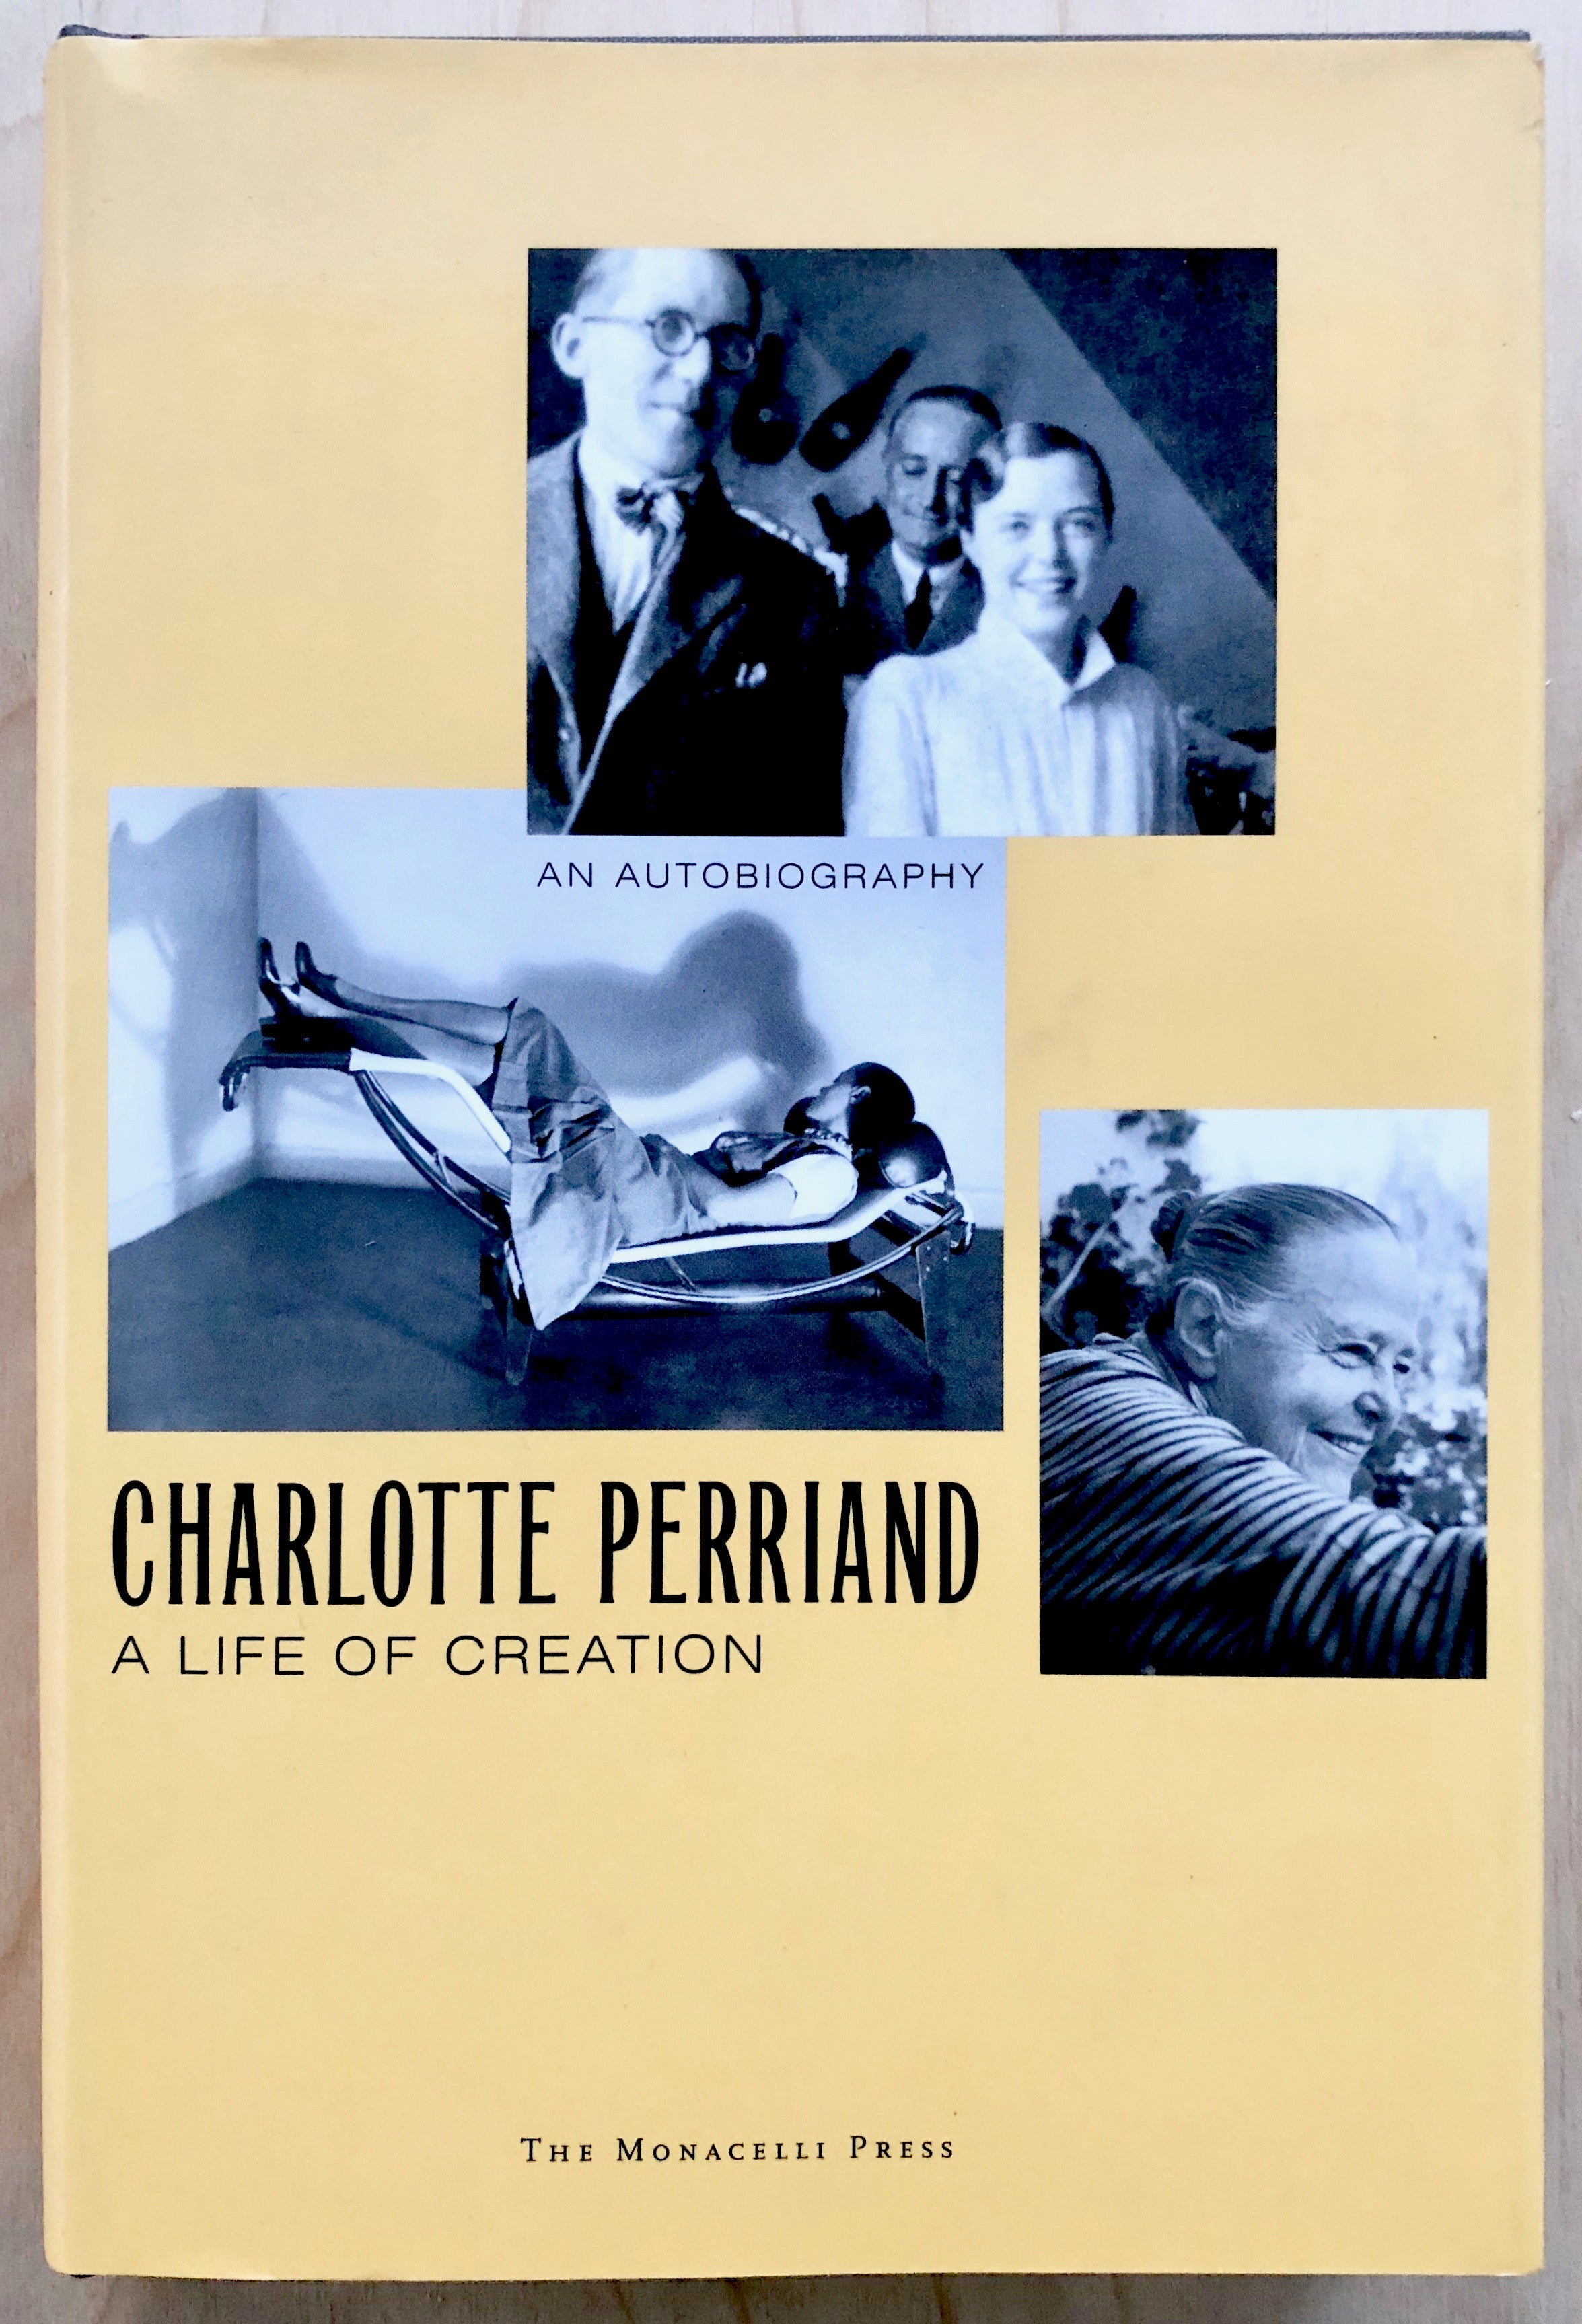 Charlotte Perriand, an Art of living - LIBERTY's Books